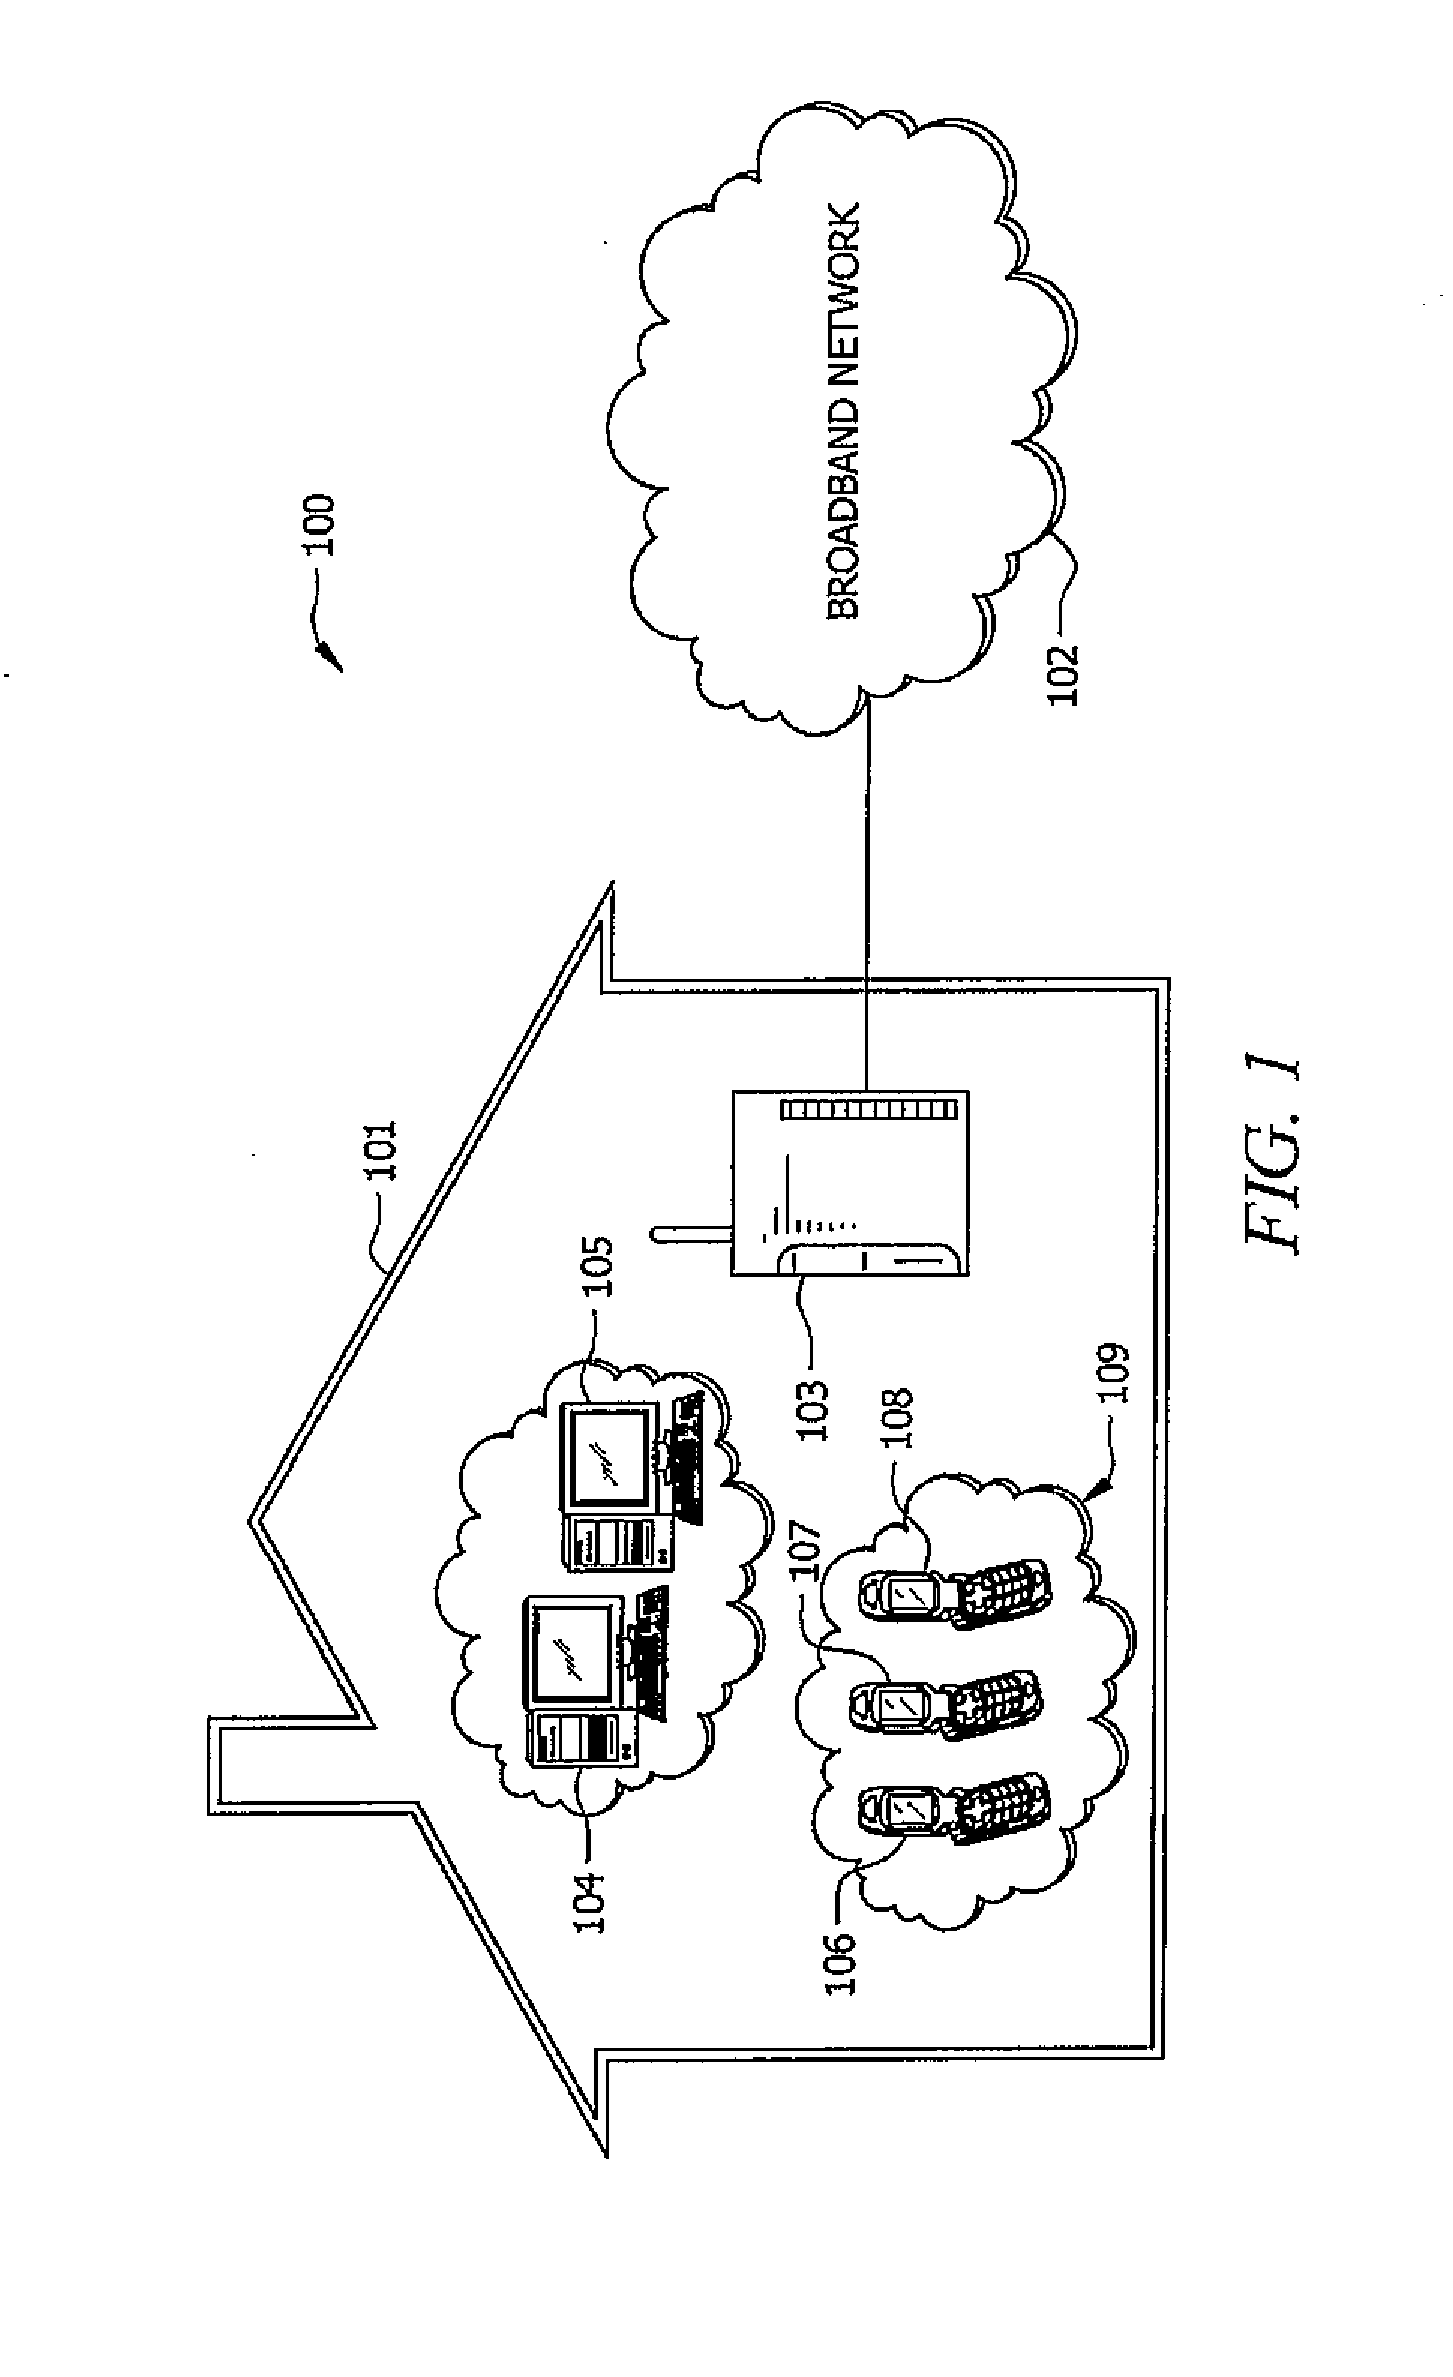 System and Method for Pre-Placing Secure Content on an End User Storage Device